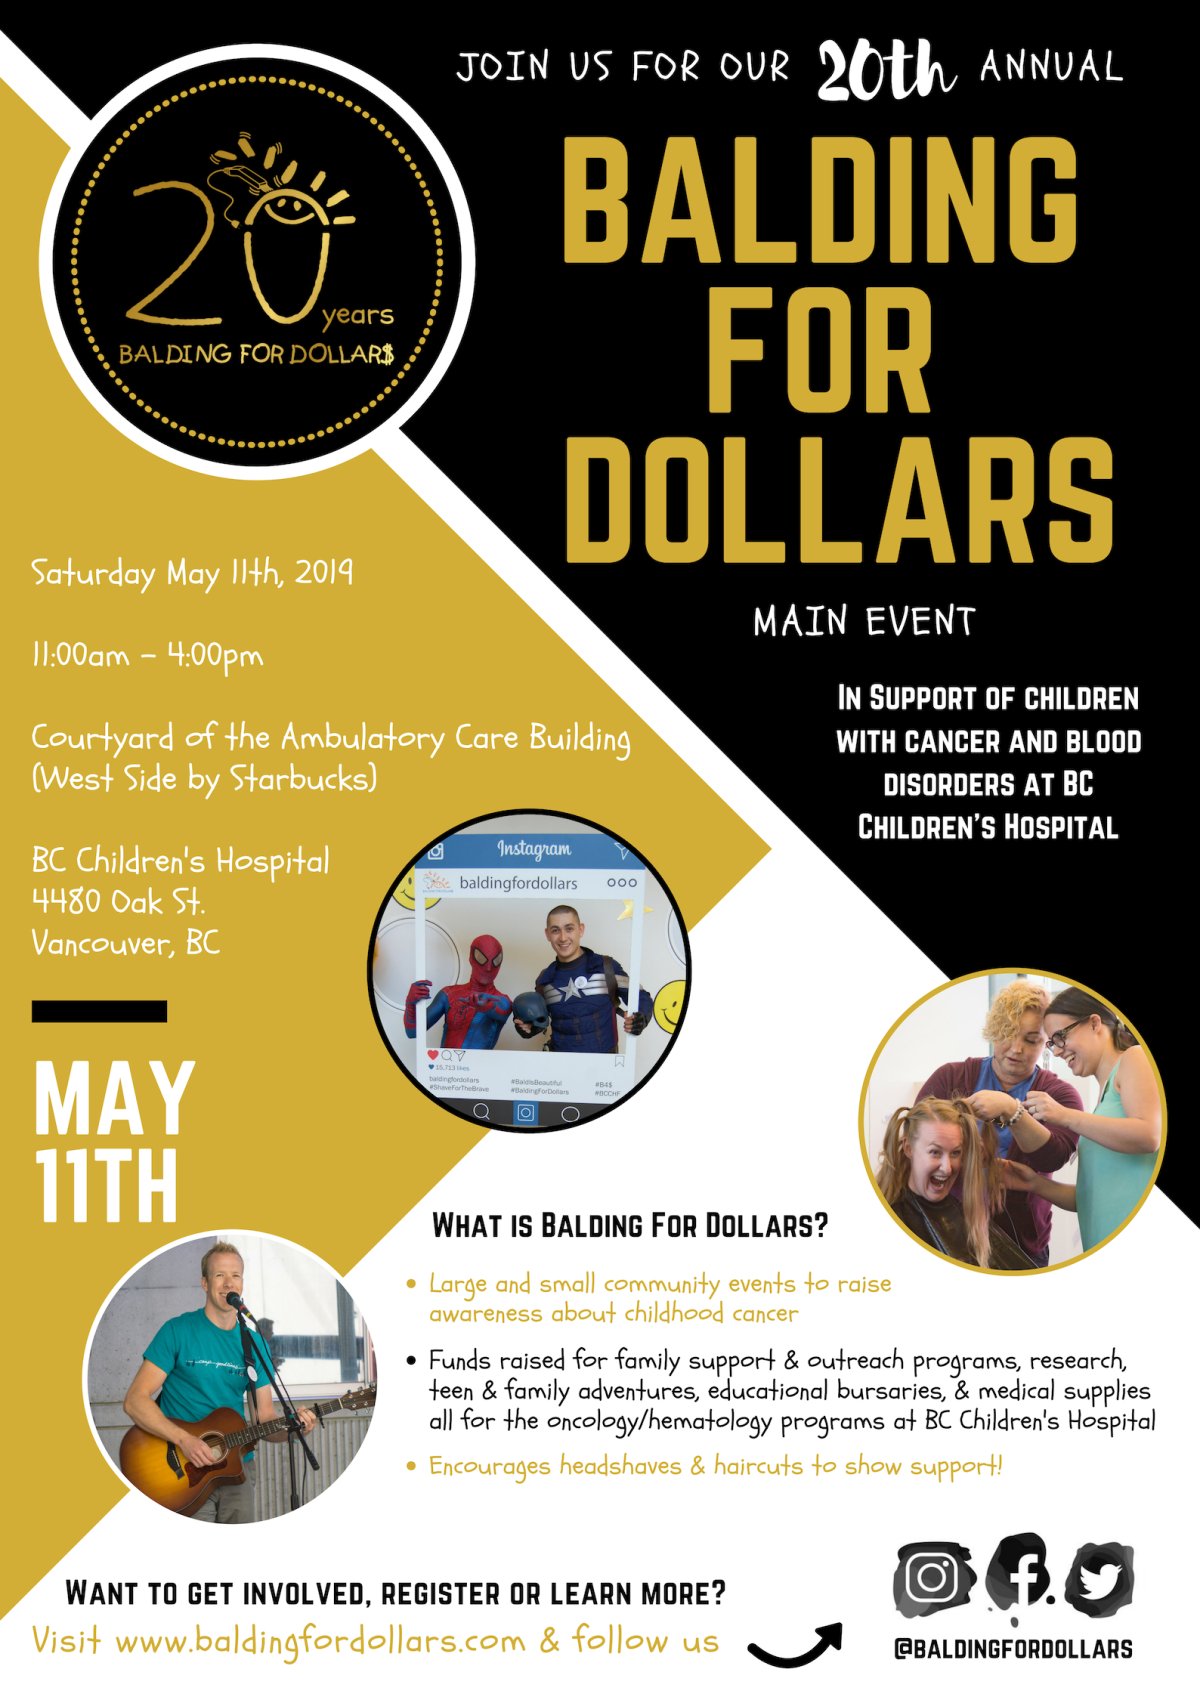 20th Annual Balding for Dollars Main Event - image